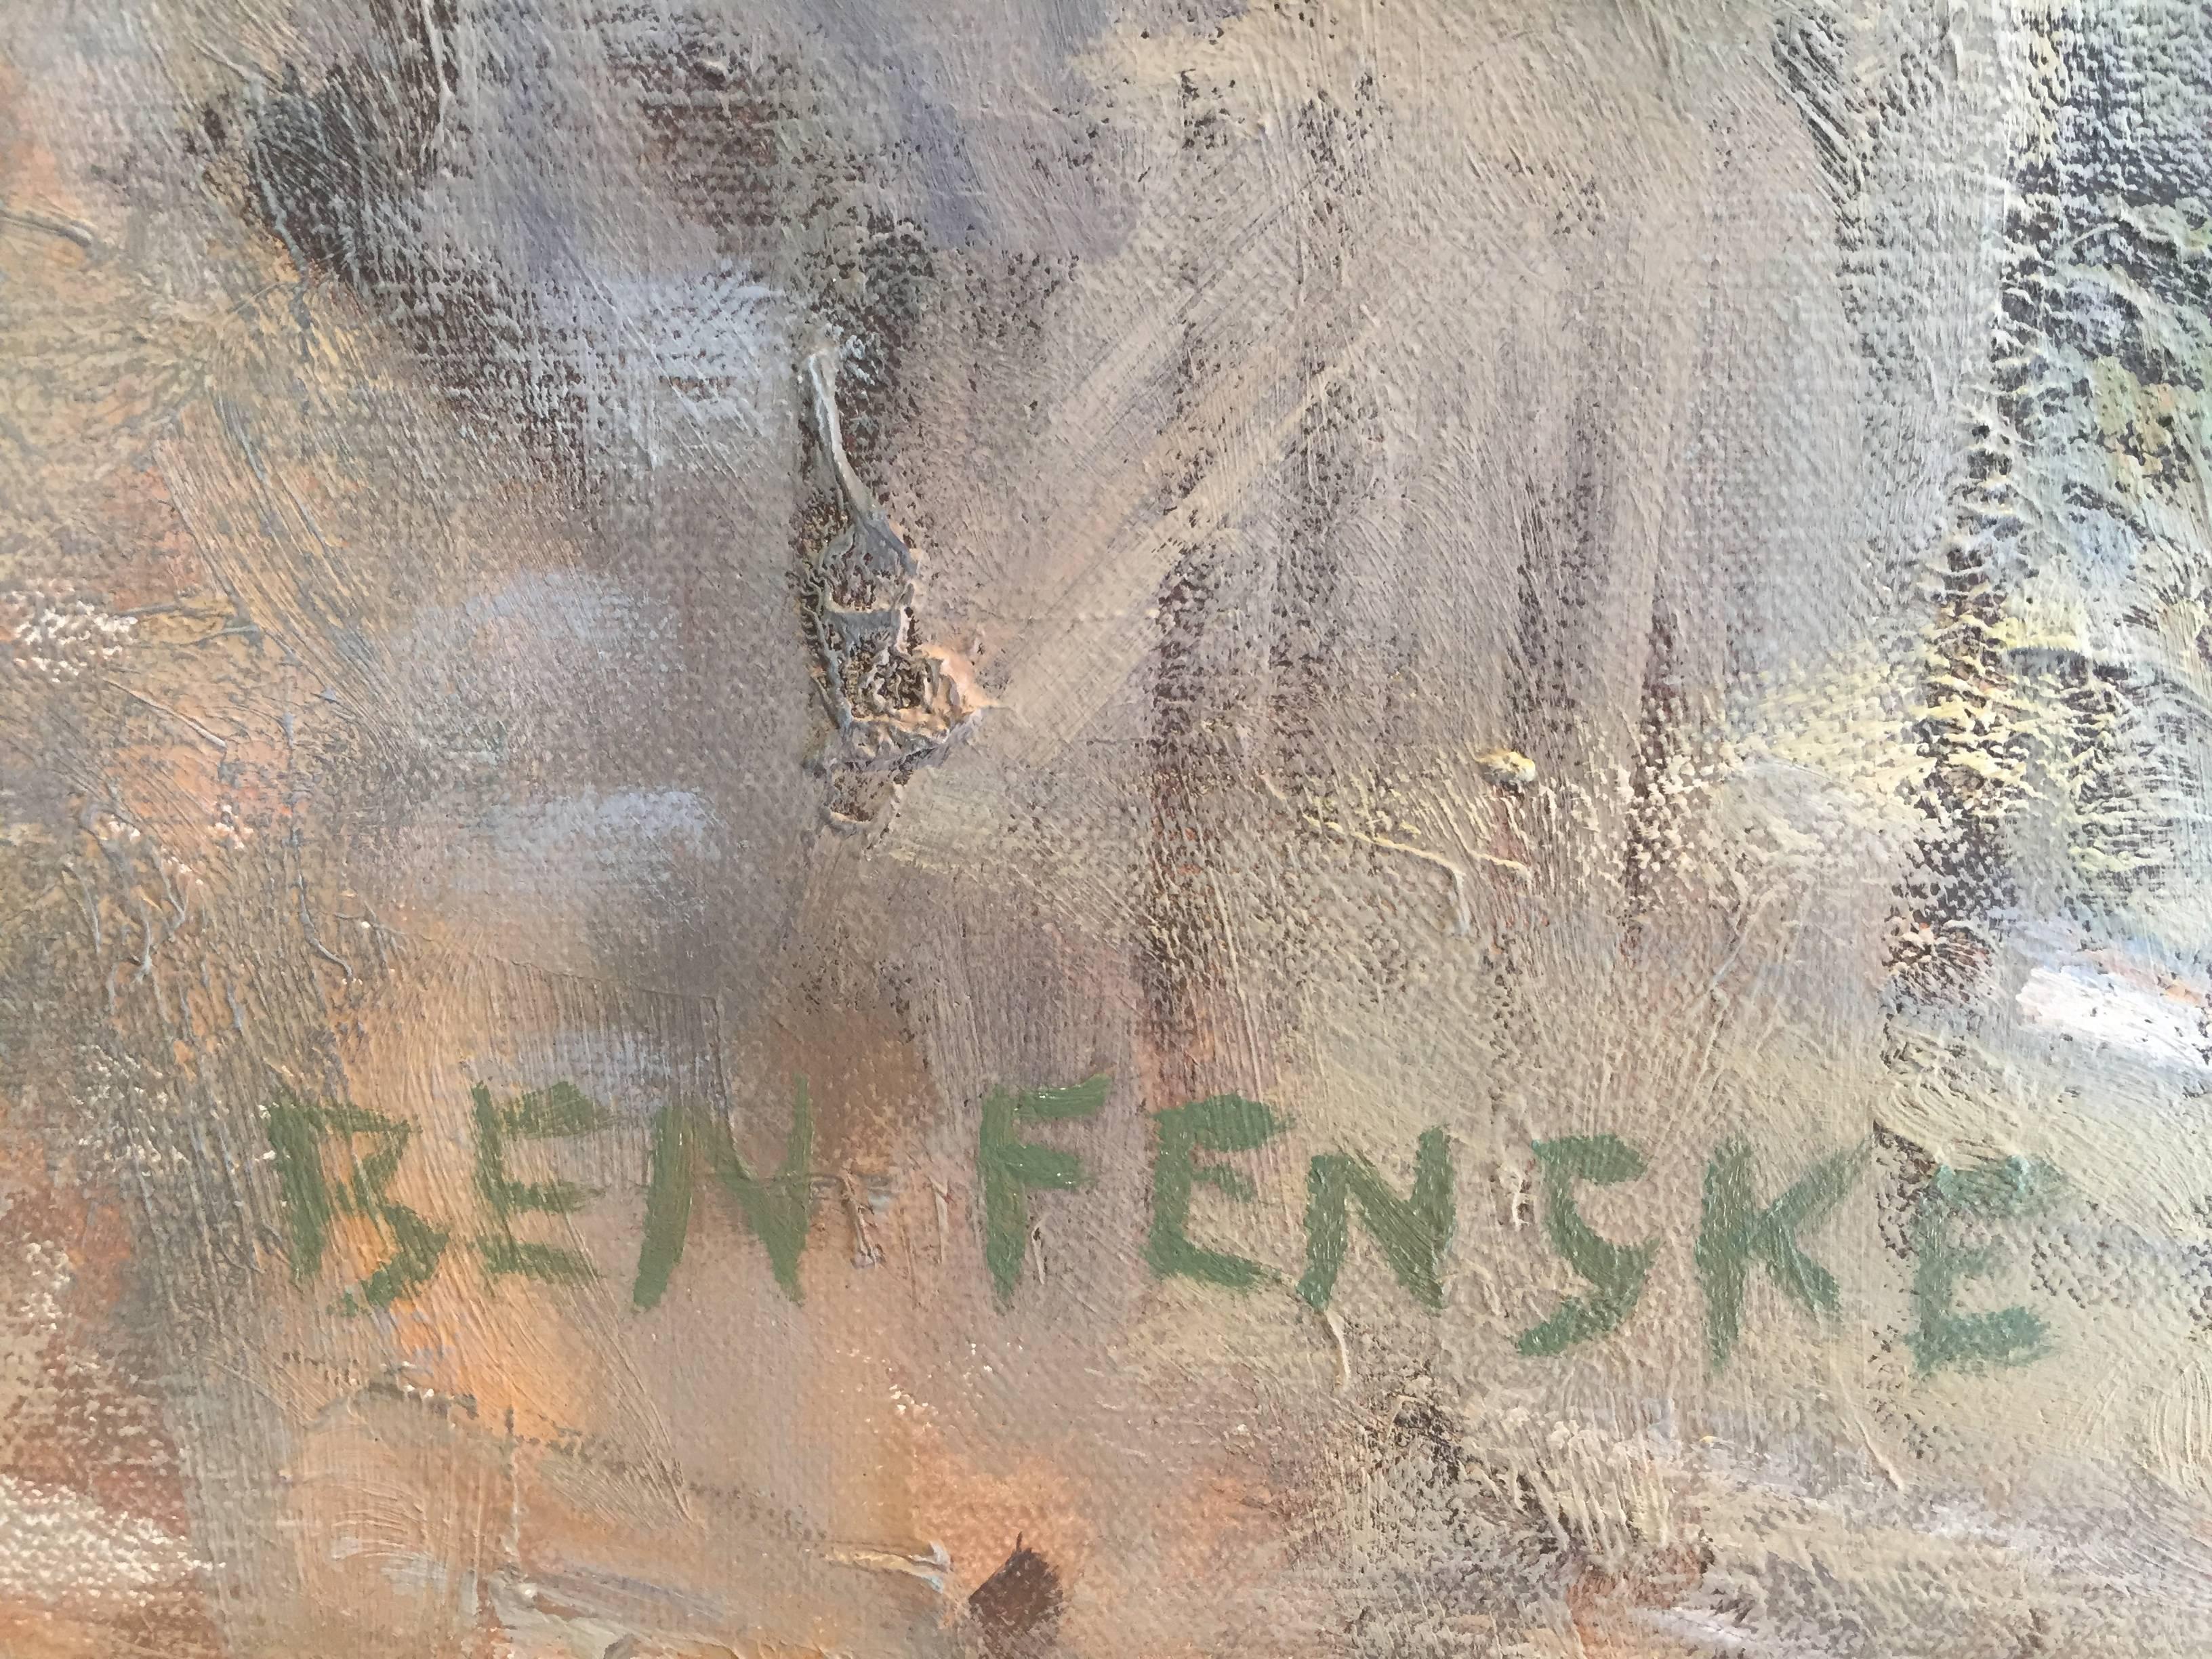 Freshly plucked from their North Haven garden in Sag Harbor, New York, friends of Ben Fenske prepared a vase of wild flowers for Ben to paint. Placed in a neutral tone environment lit entirely by natural light, the colorful flower petals reflect